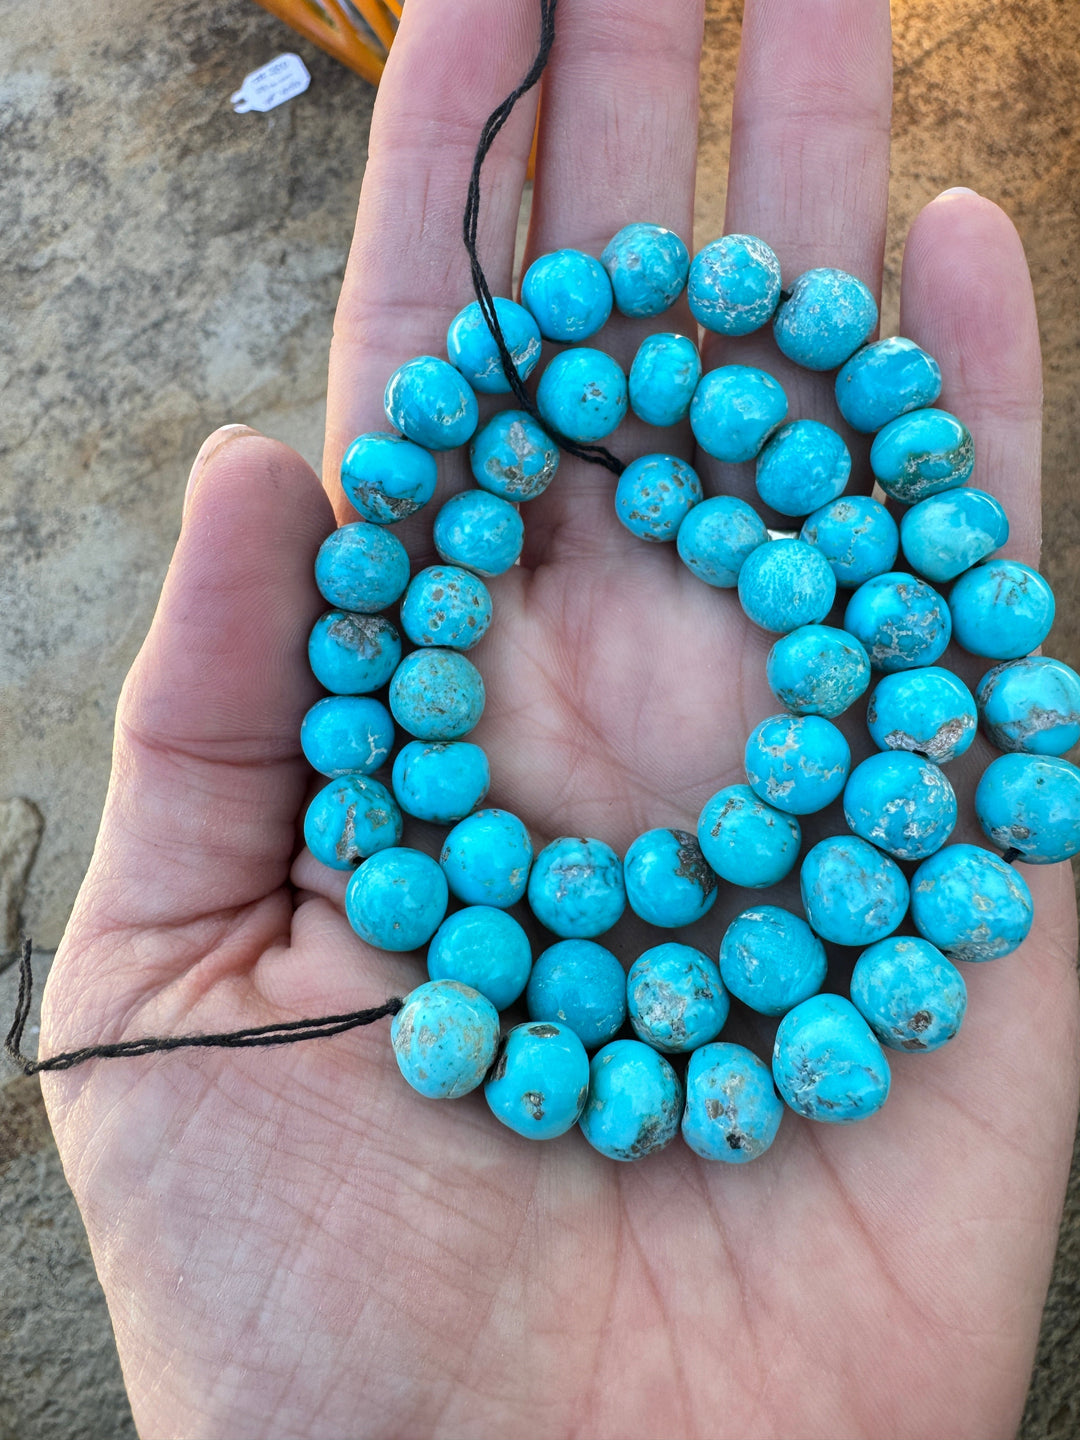 Arizona Sleeping Beauty Turquoise Beads Jewelry-5mm-6mm Faceted